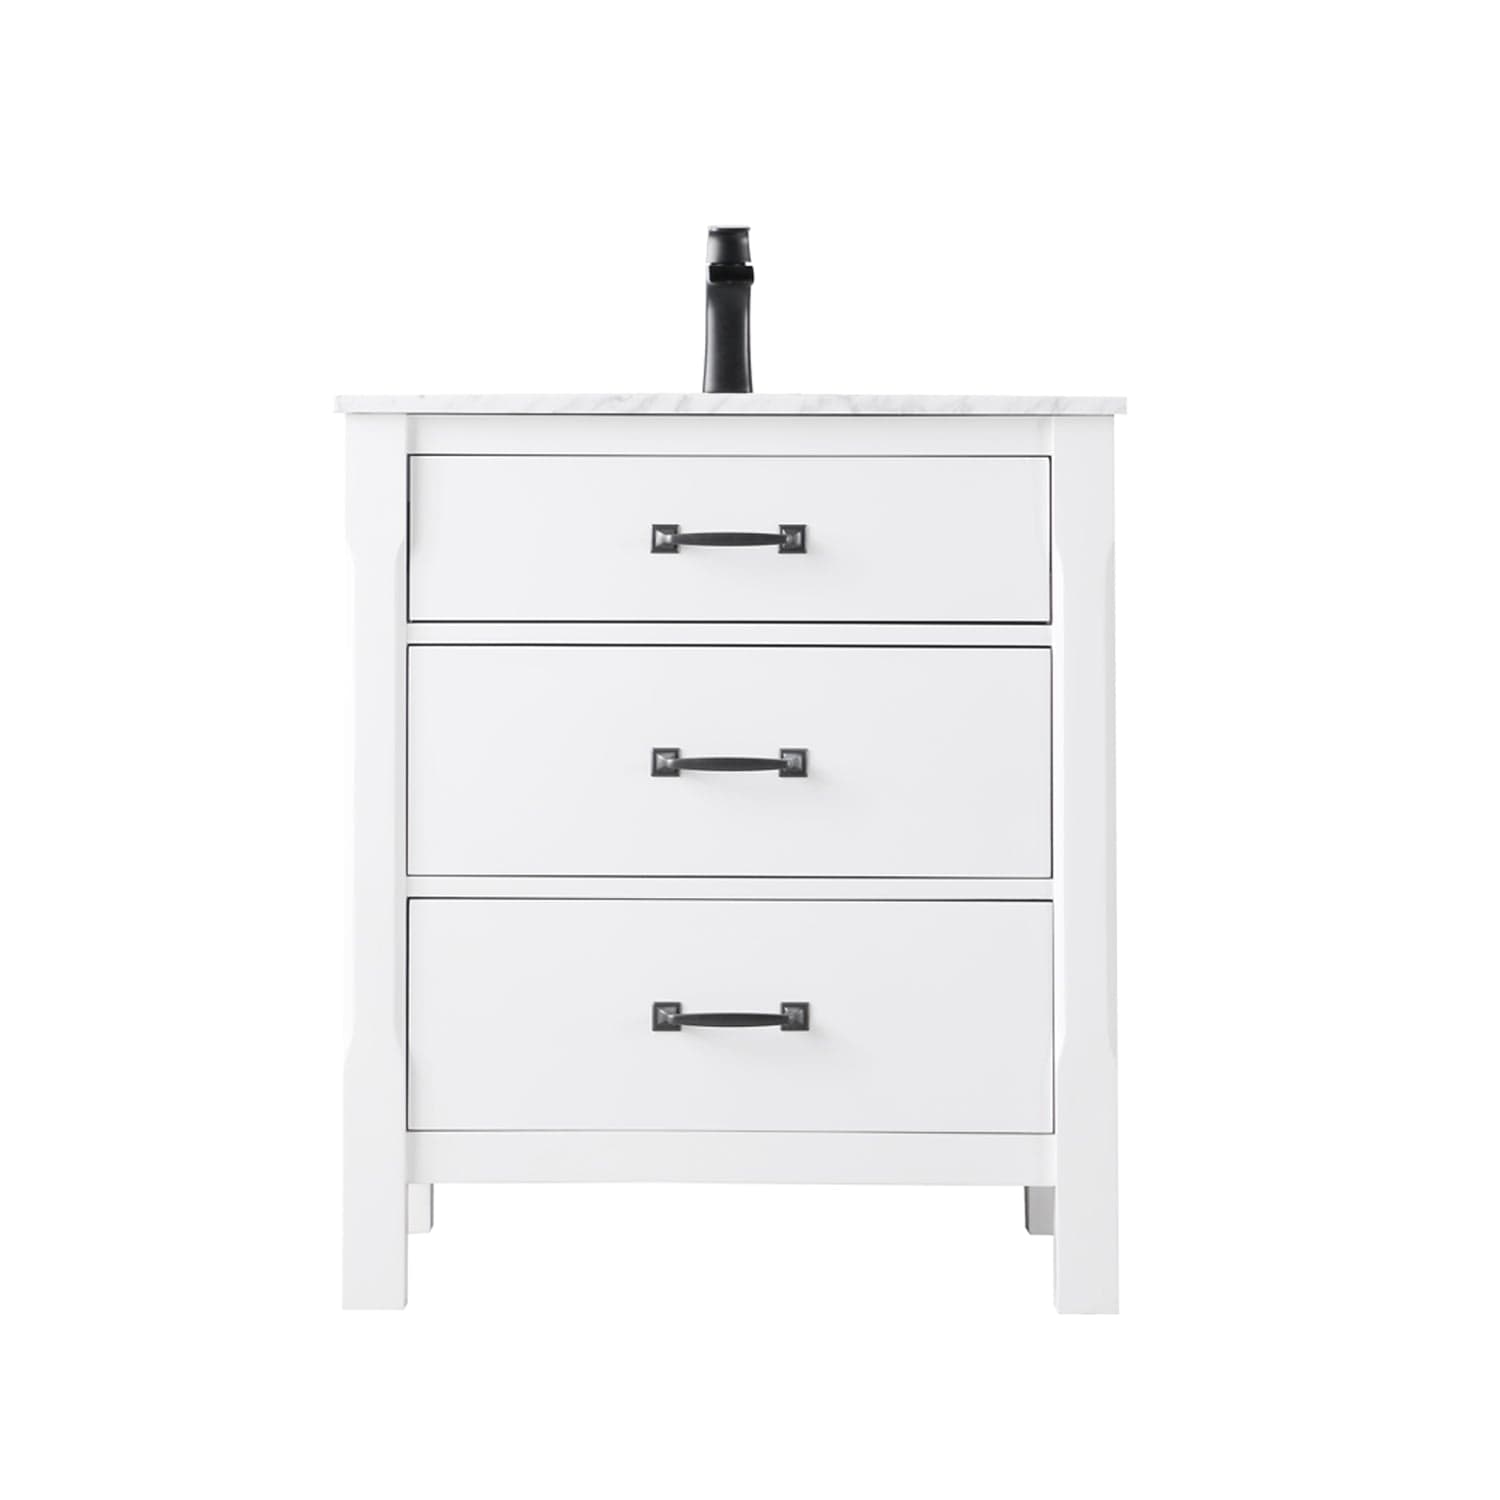 Altair Maribella 30" Single Bathroom Vanity Set in White and Carrara White Marble Countertop without Mirror 535030-WH-CA-NM - Molaix631112970266Vanity535030-WH-CA-NM